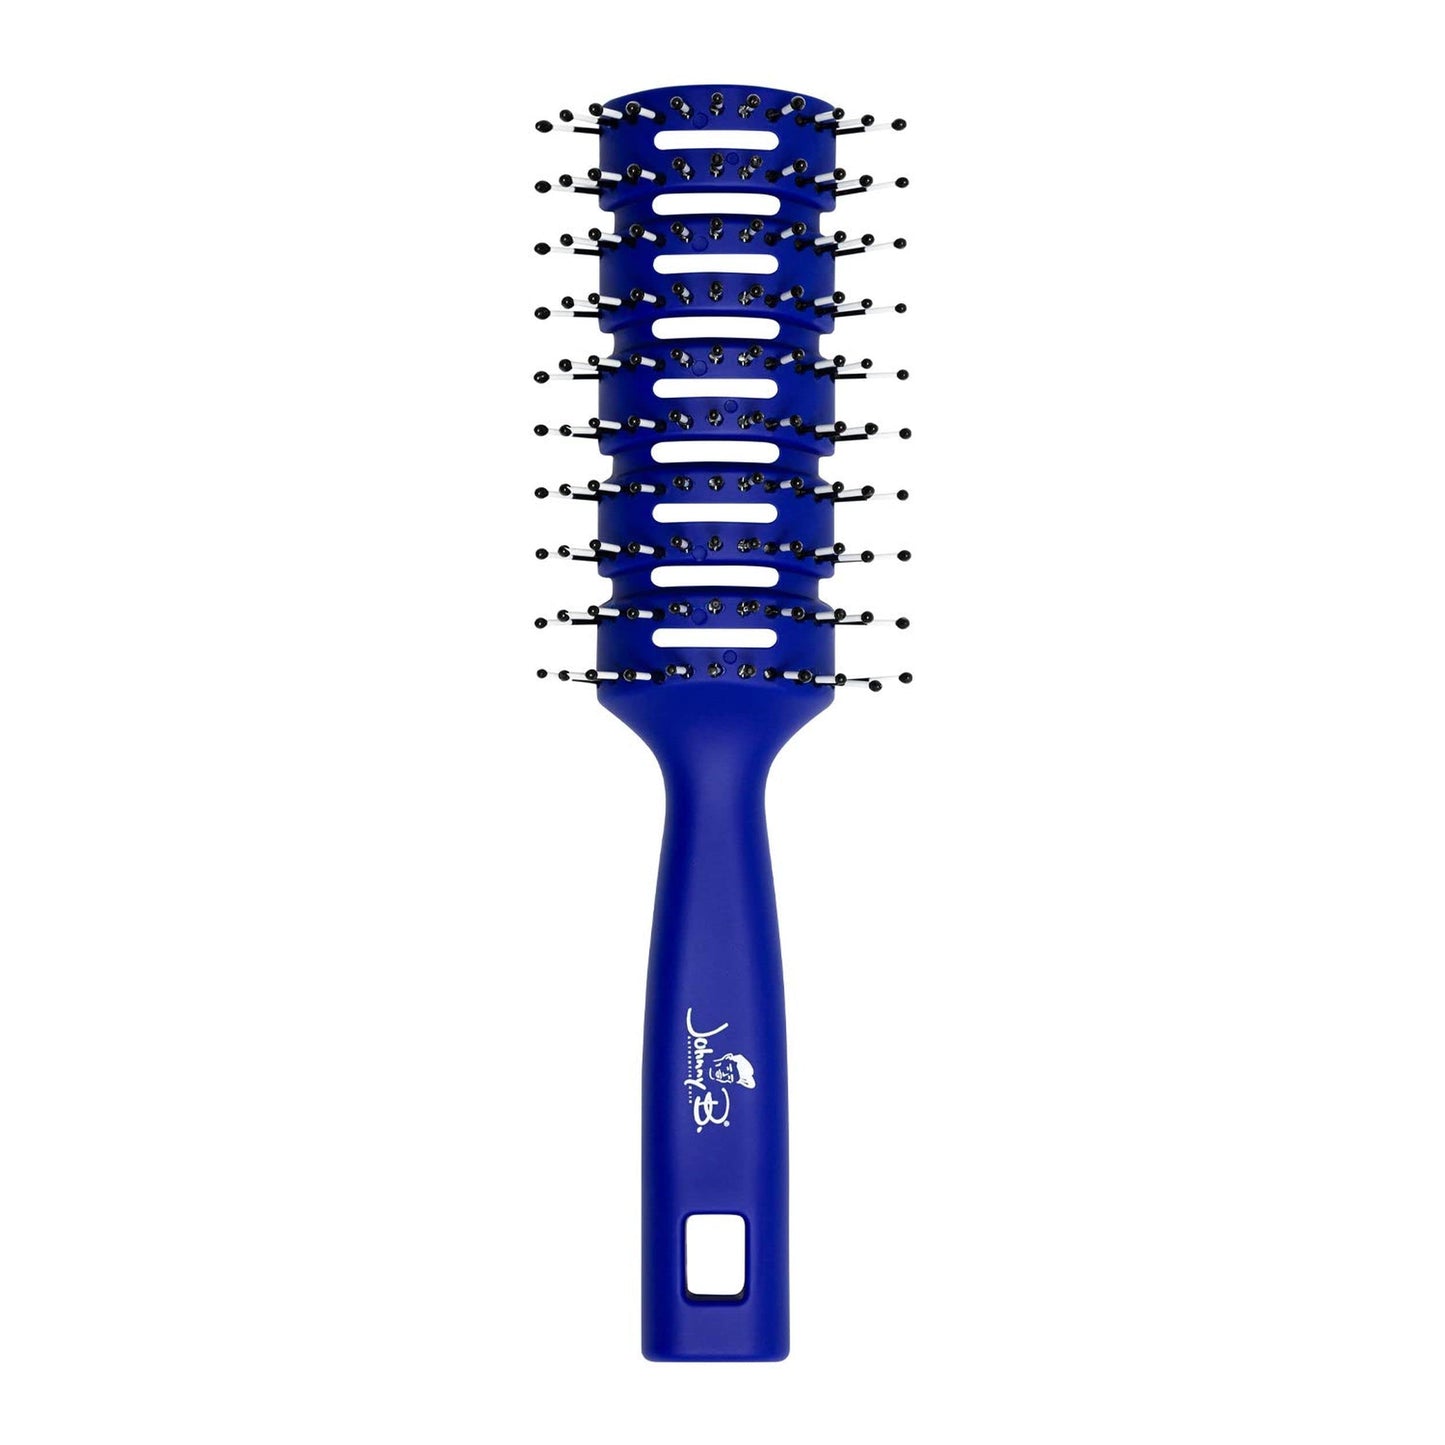 Johnny B Professional Vented Hair Brush for Blow Drying & Detangling, Ball-Tipped Small Bristles, Grooved Handle (Blue)